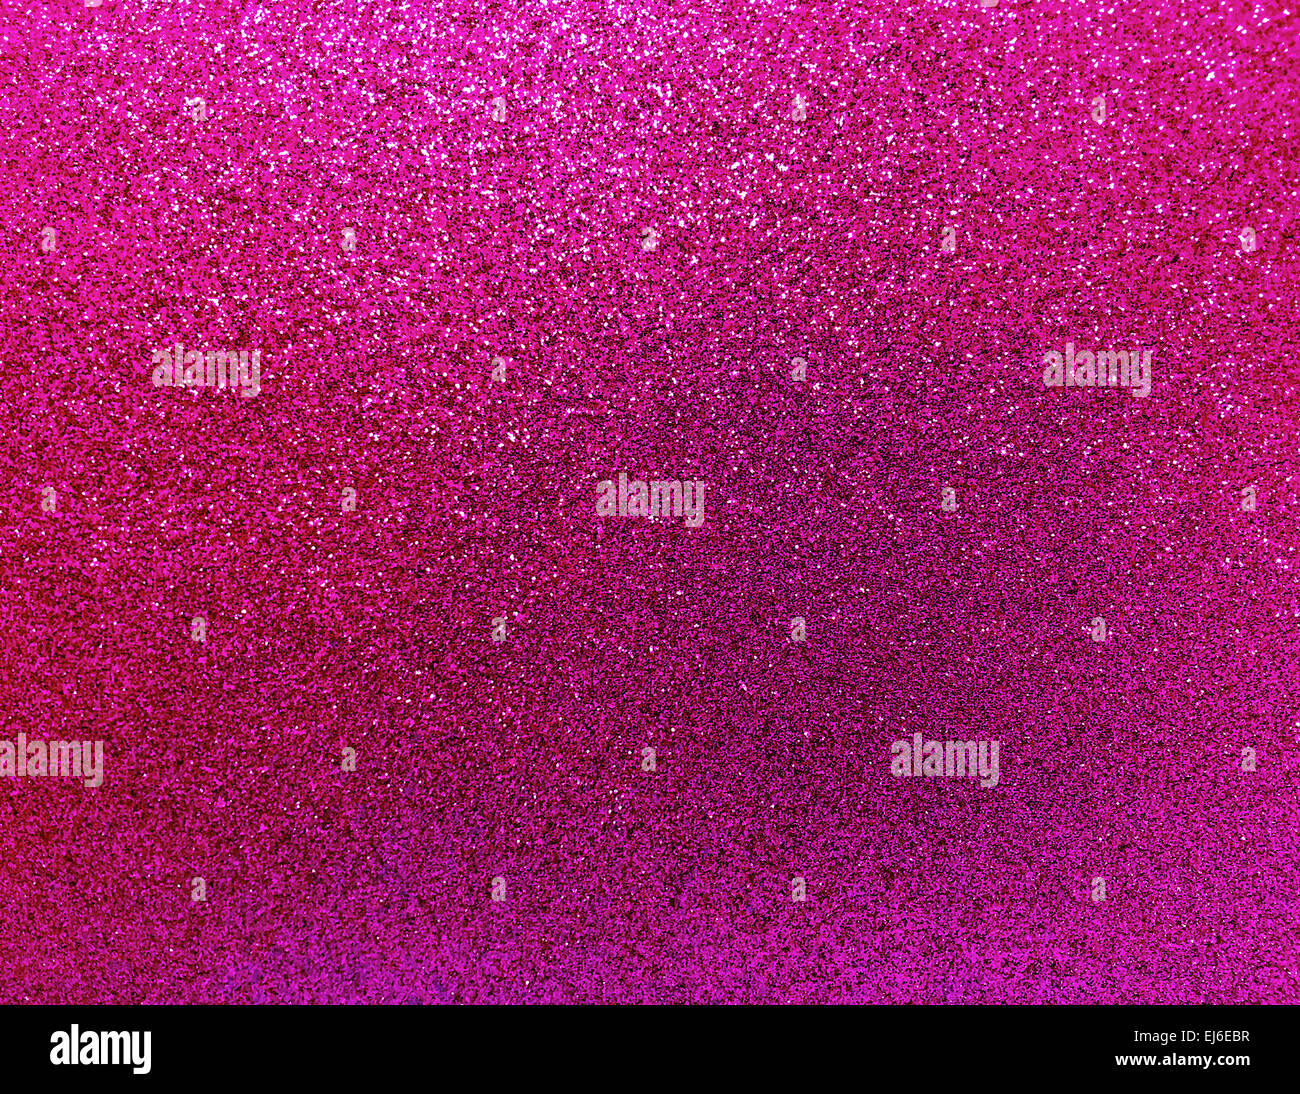 Purple colored glitter paper texture or vintage background Stock Photo -  Alamy